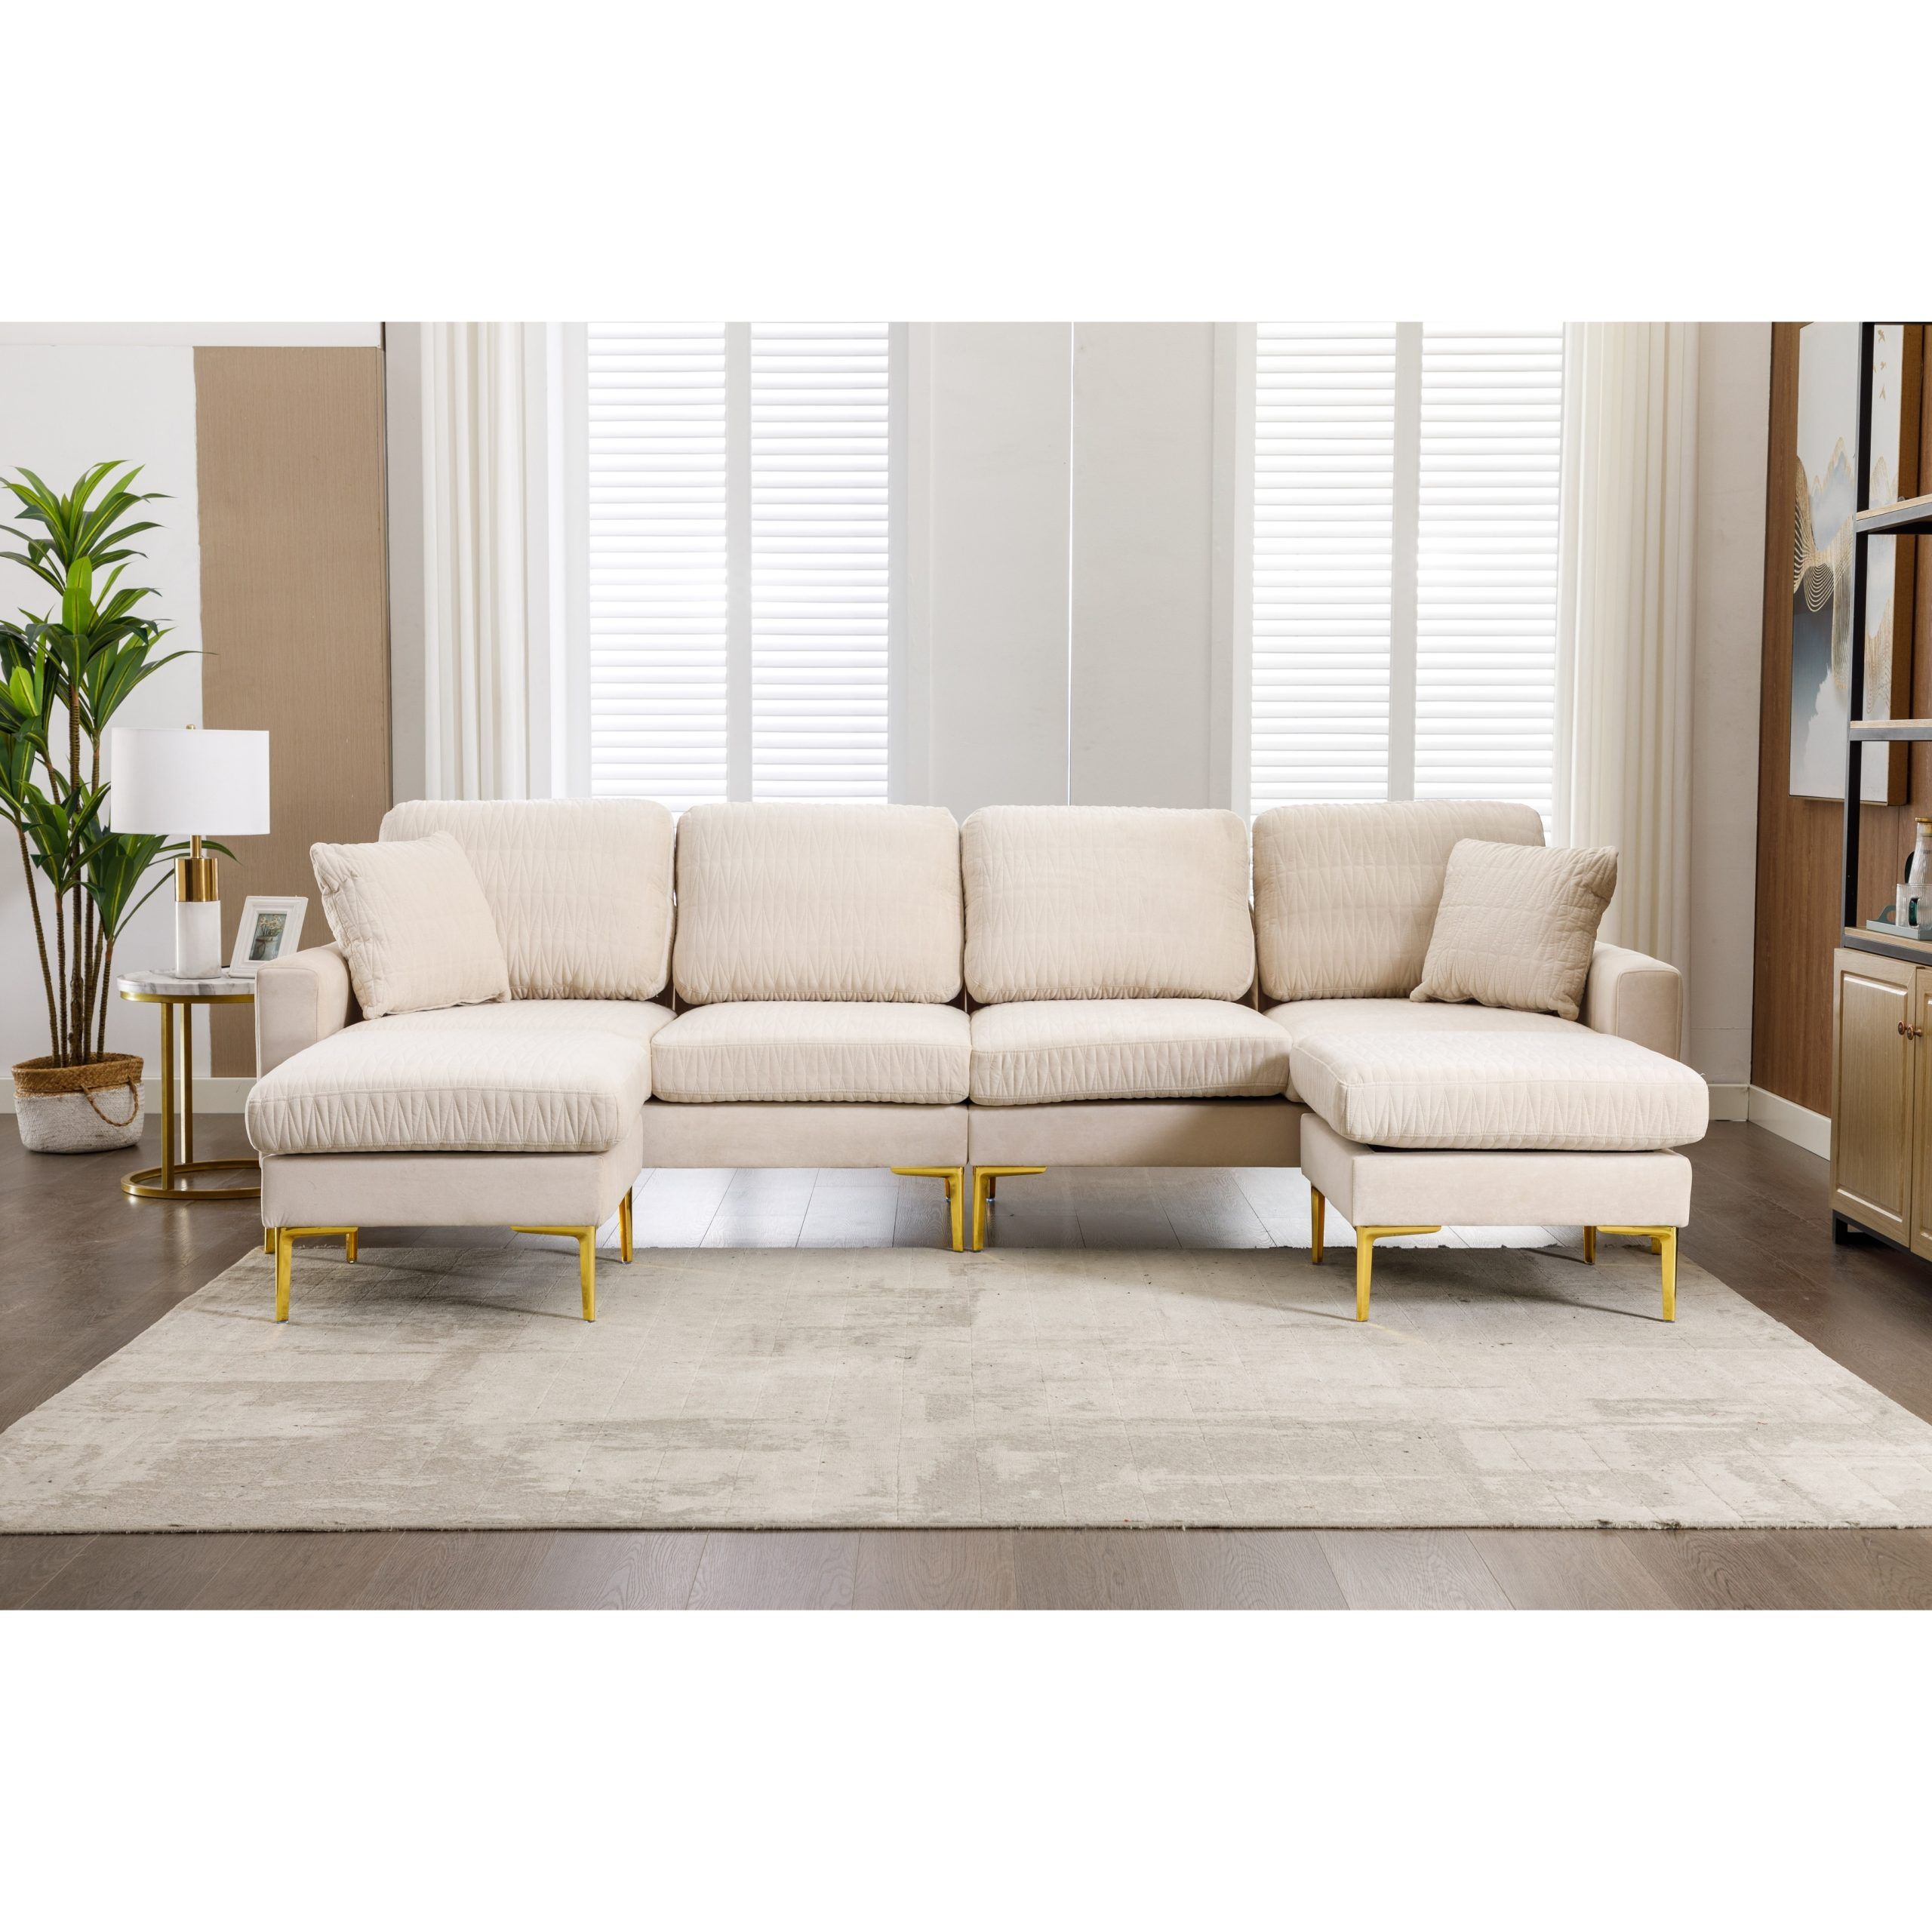 Velvet Modular Sectional Sofa Set For Living Room, Sponge Filled Reversible  Couch With Movable Ottomans And Golden Legs, Beige – Bed Bath & Beyond –  39034670 In Cream Velvet Modular Sectionals (Photo 14 of 15)